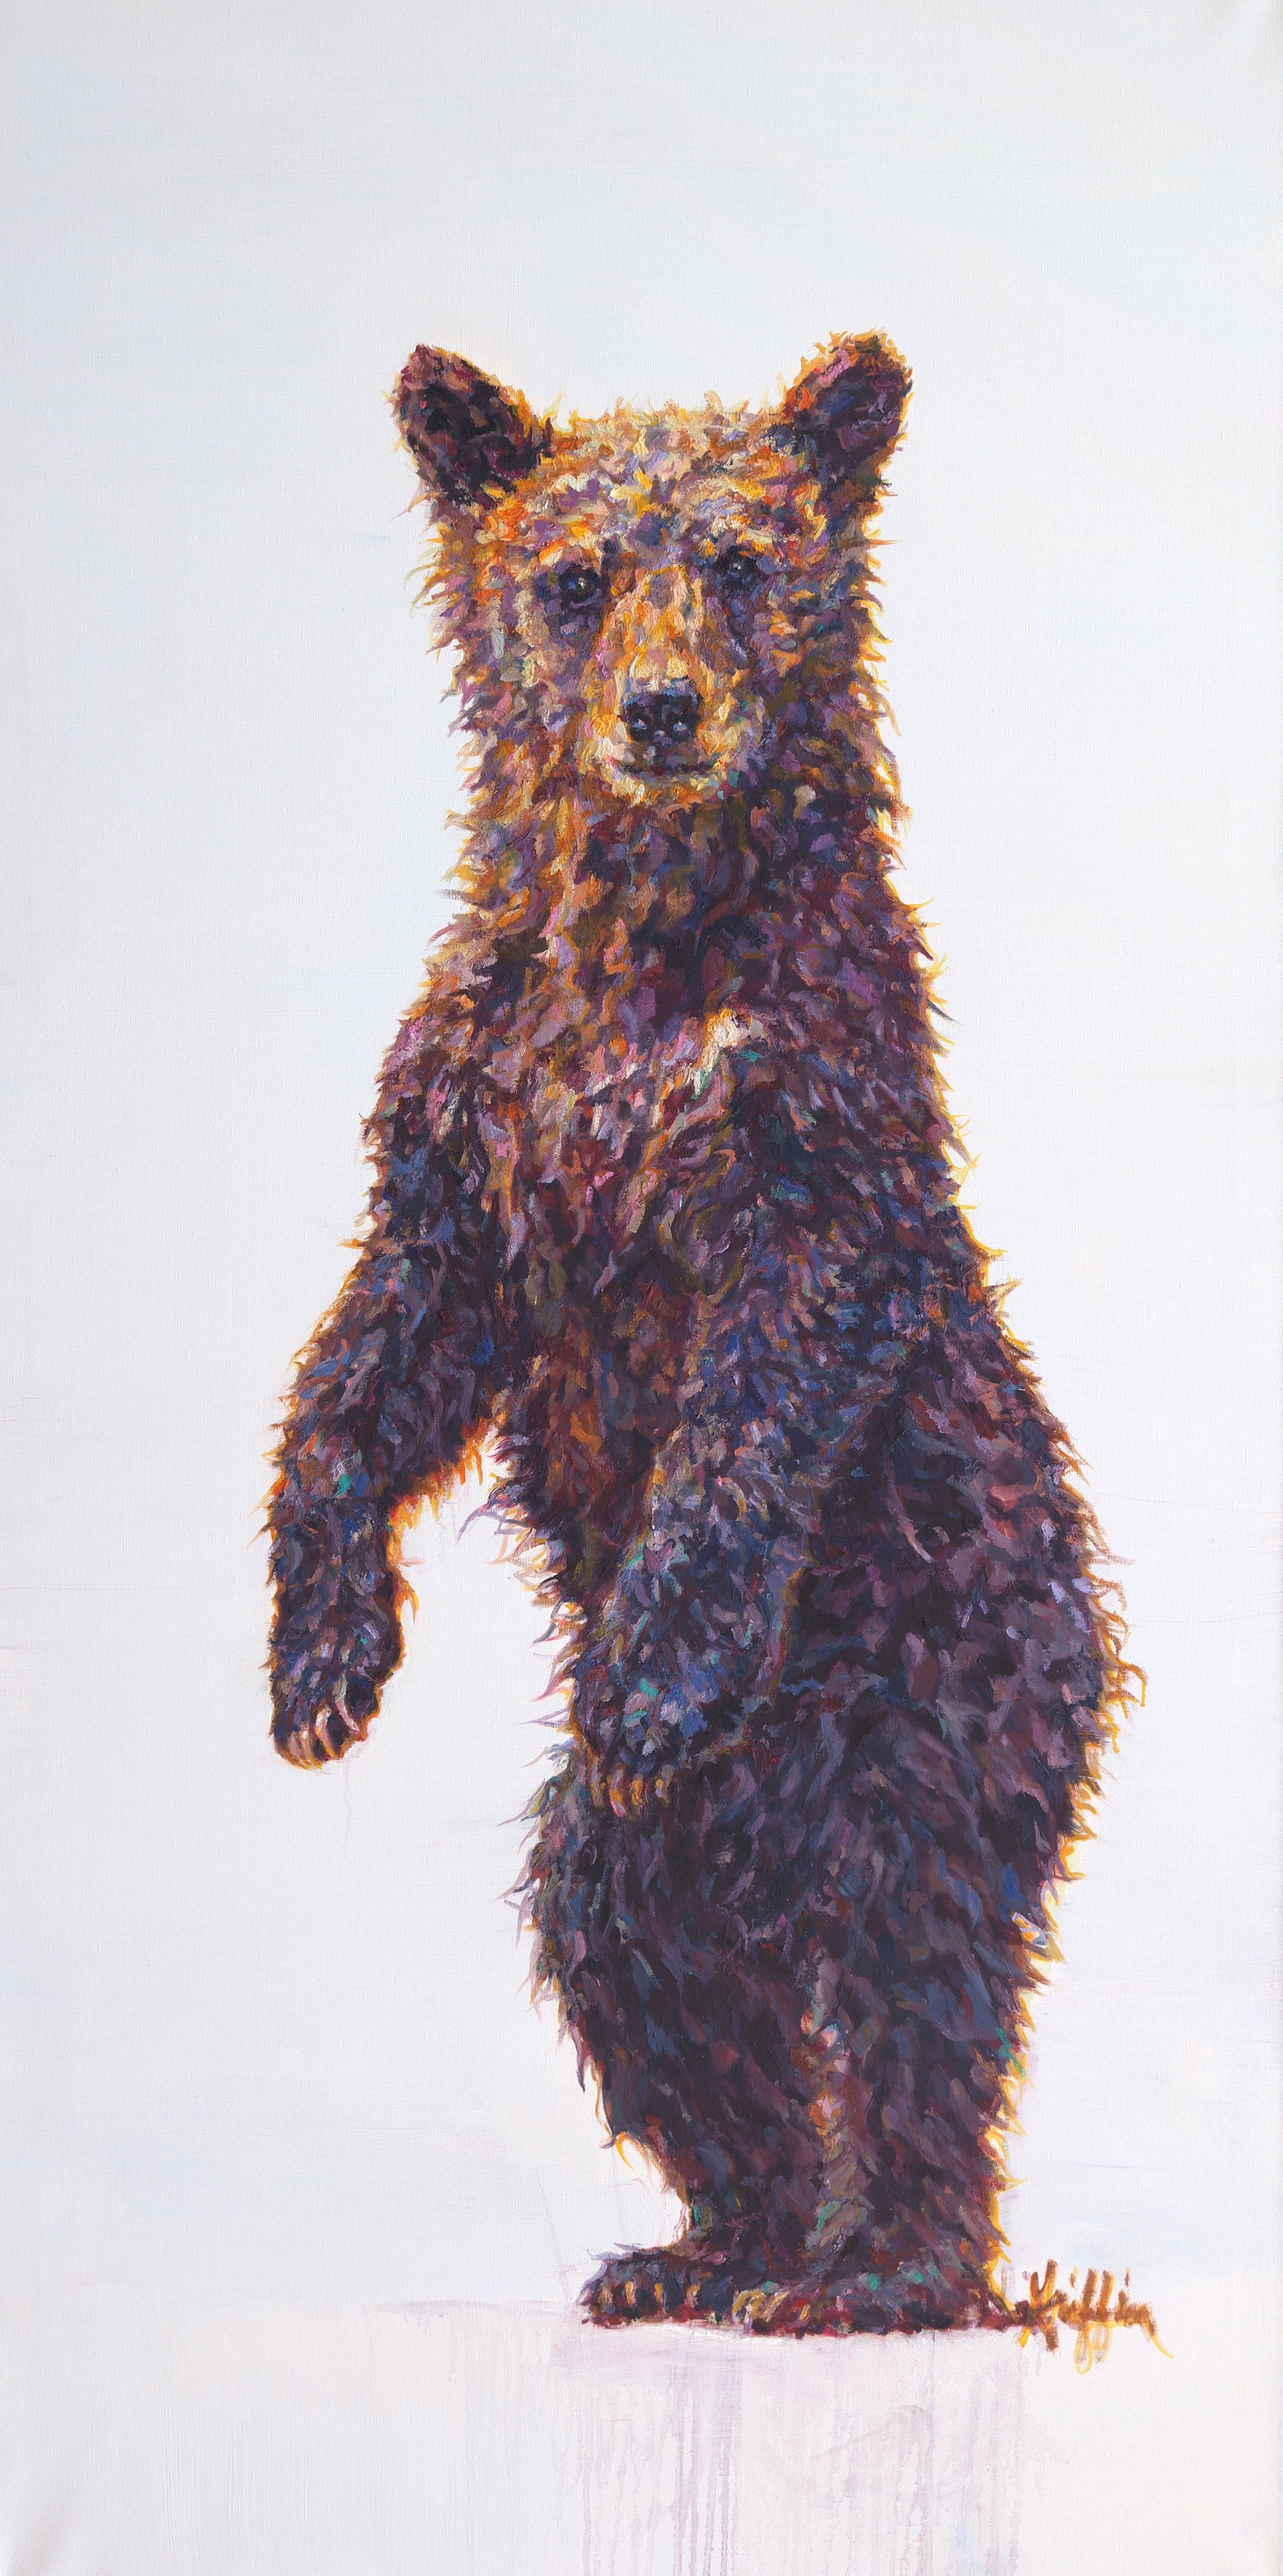 Original Oil Painting Of Standing Grizzly Bear Cub In A Traditional Graphic Style With Colors Of Browns Pinks Purples And White